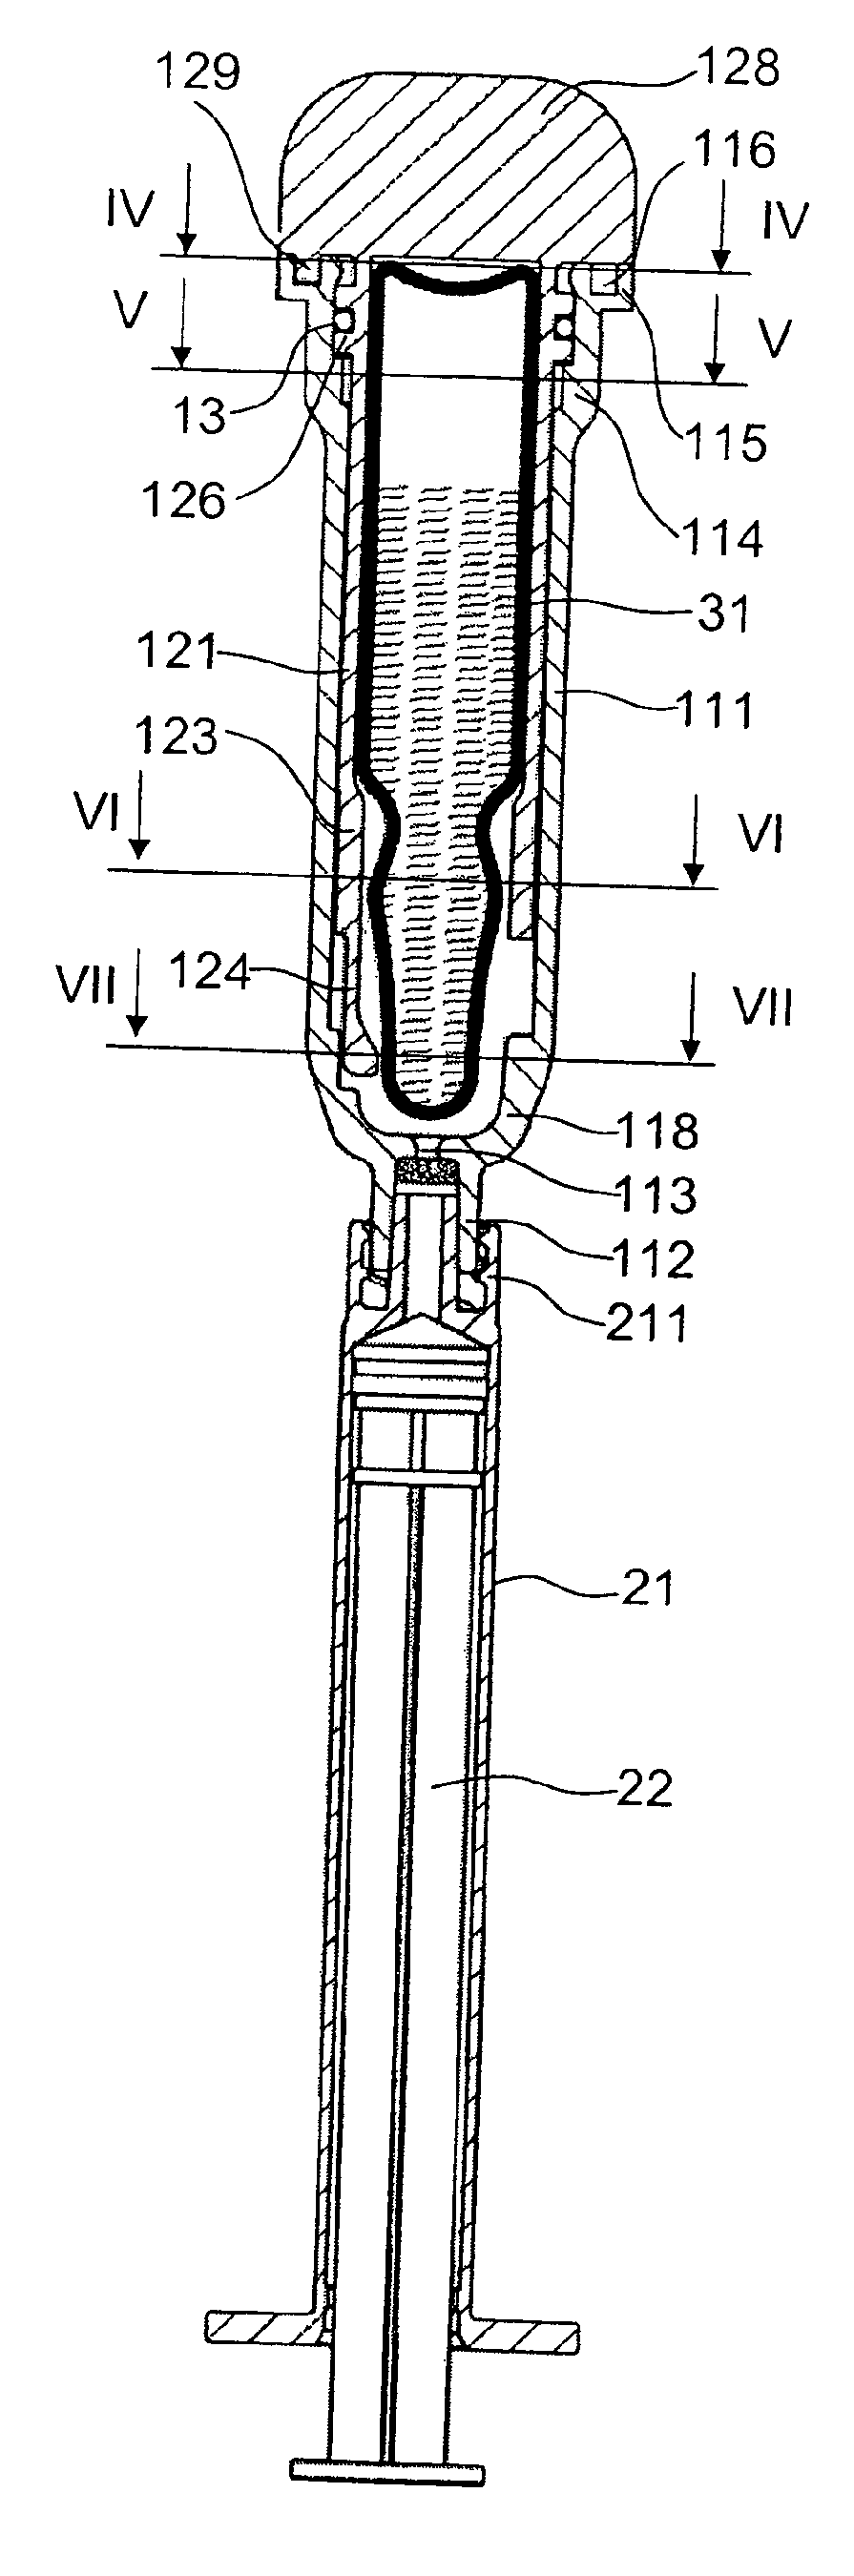 Device for opening an ampoule